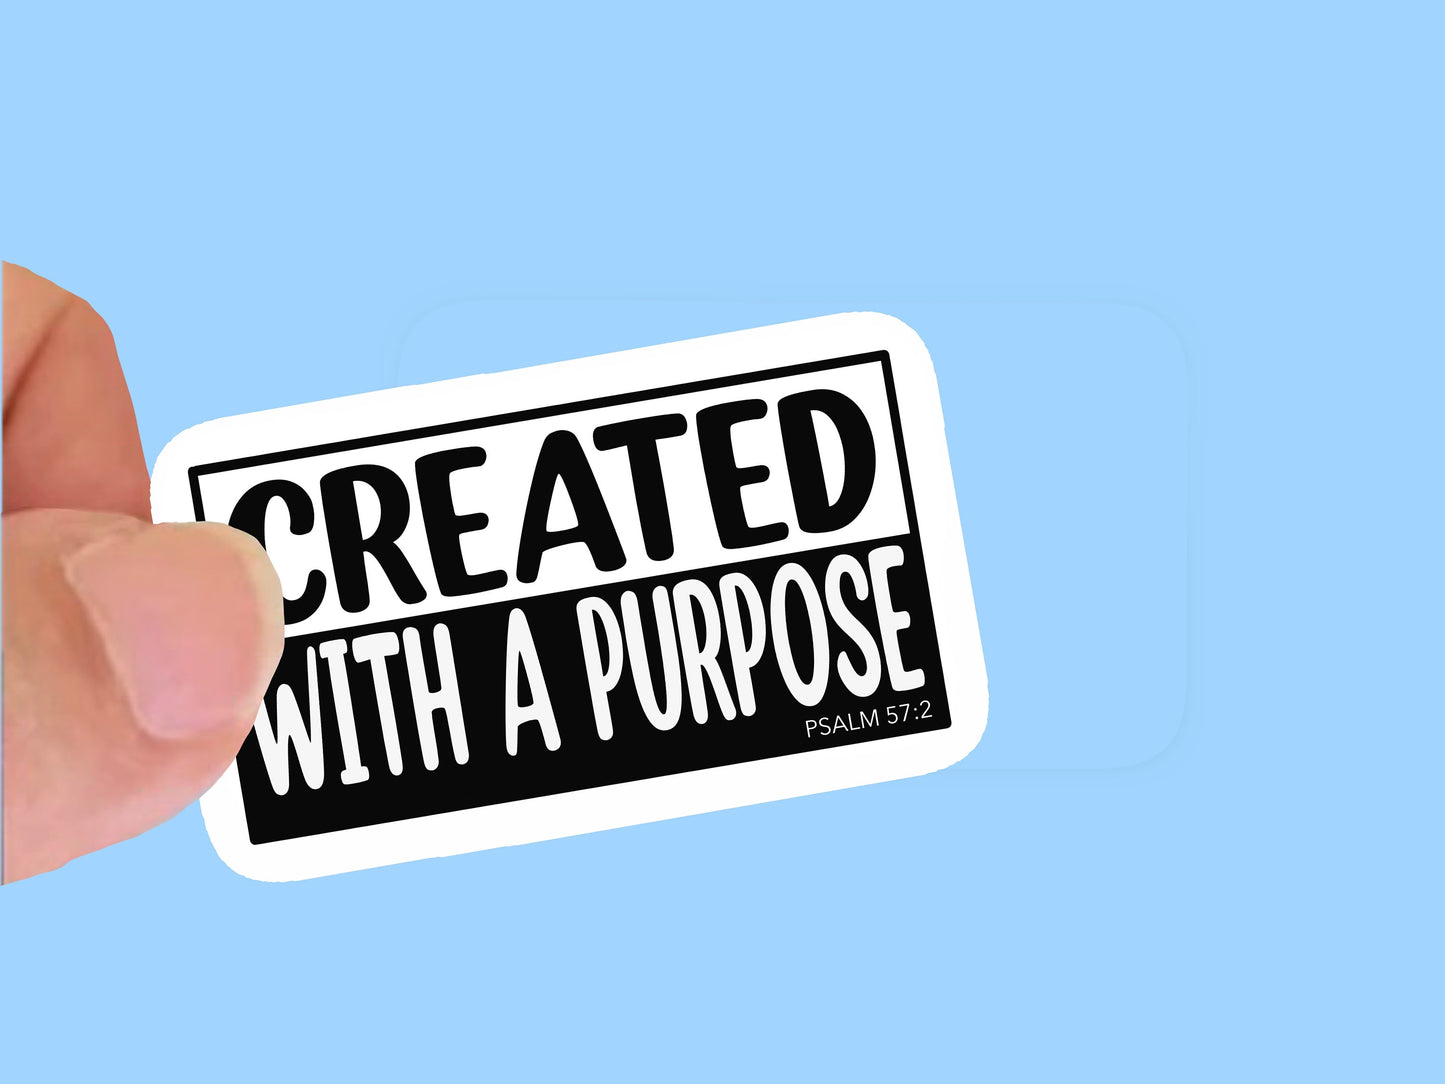 Created with a Purpose Psalm 57:2 , Christian Faith UV/ Waterproof Vinyl Sticker/ Decal- Choice of Size, Single or Bulk qty